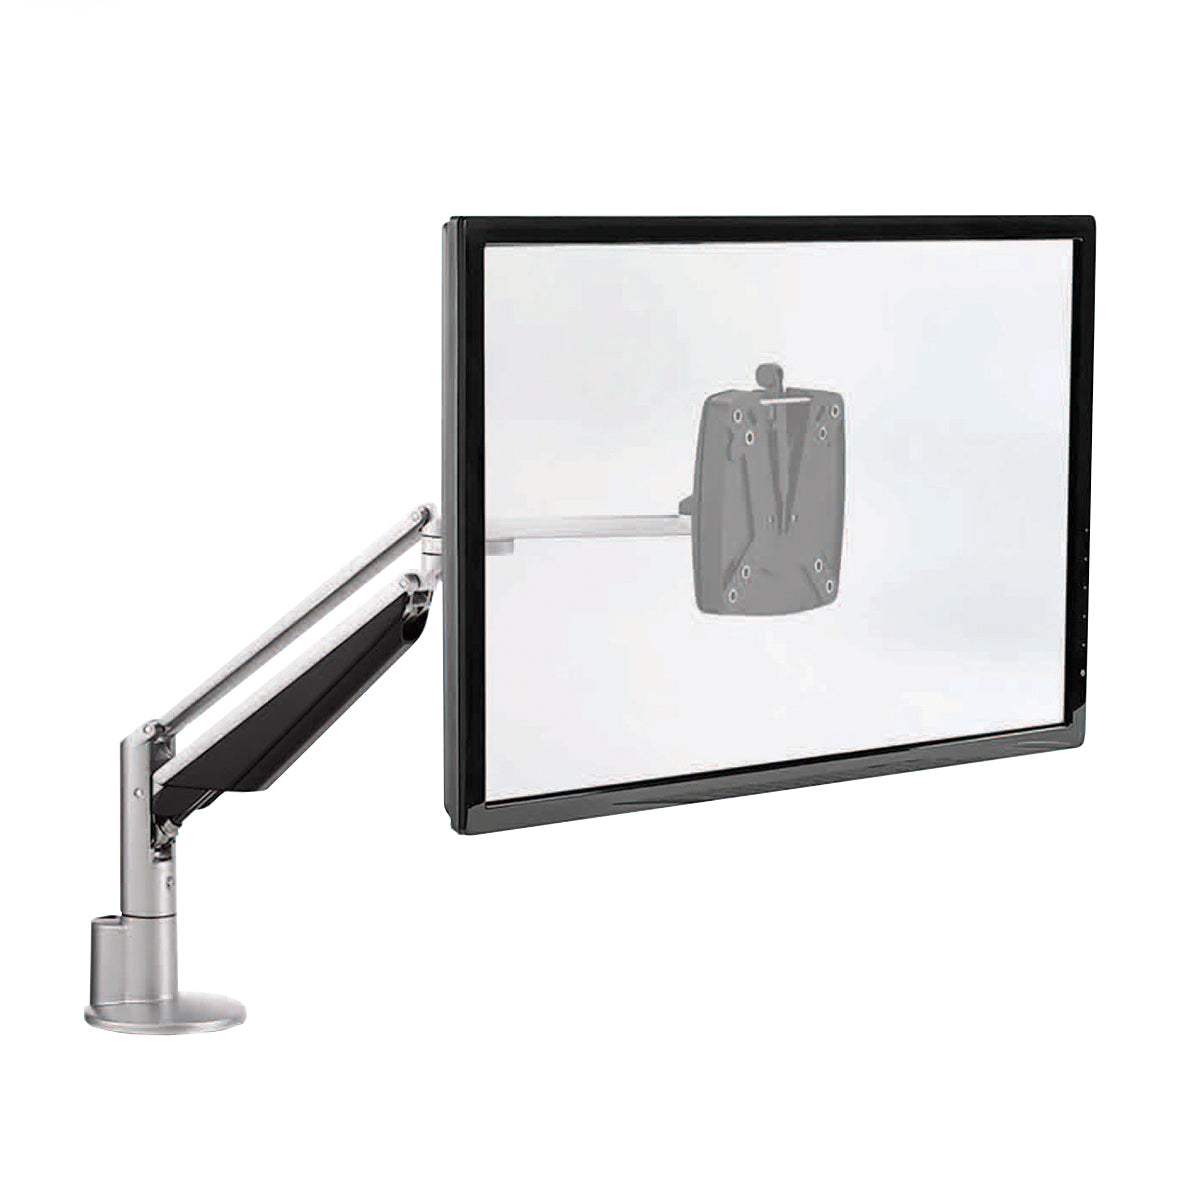 CLU Single Screen Deluxe Monitor Arm w/Extended Reach for